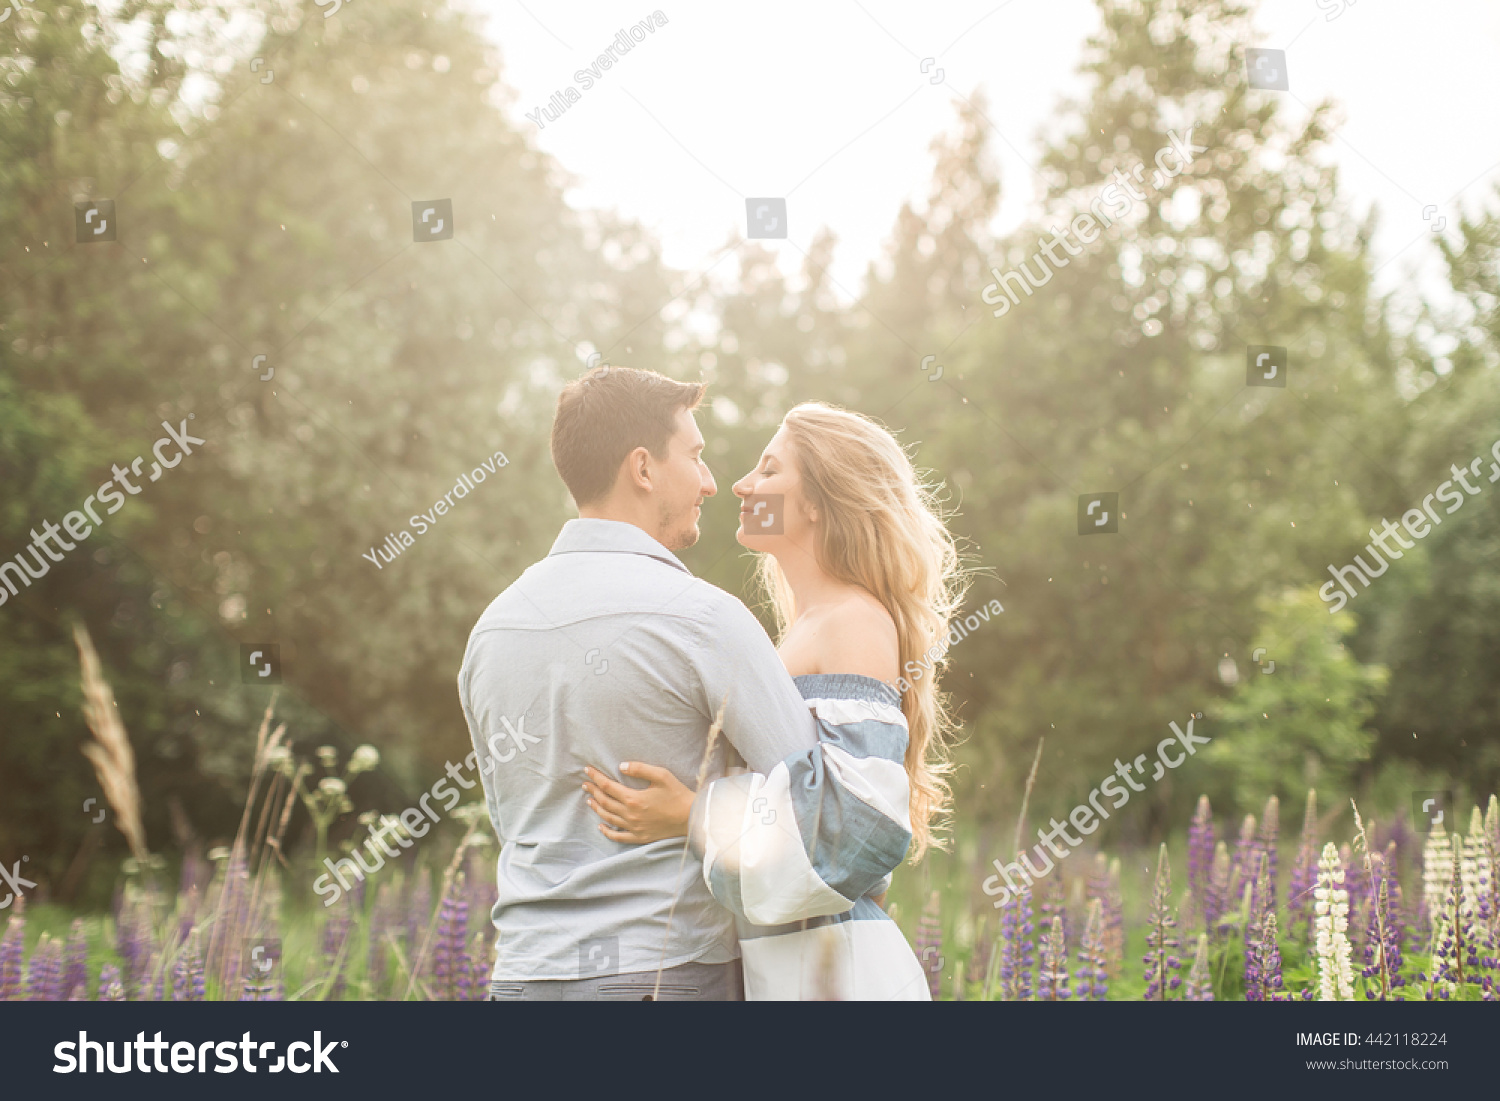 Loving Couple Embracing Each Other Nature Stock Photo 442118224